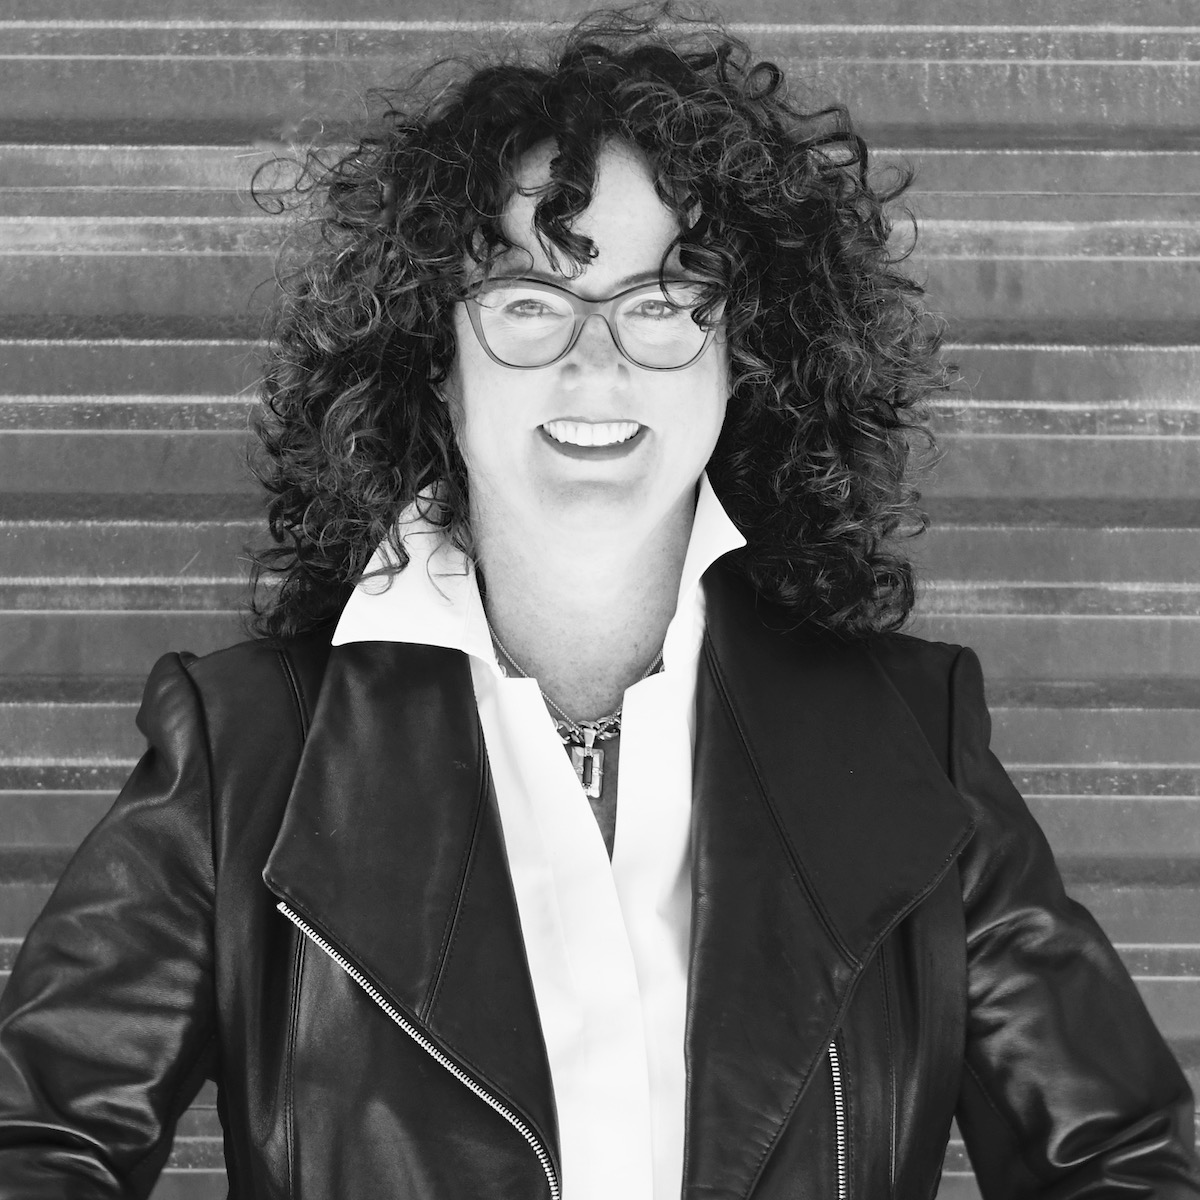 A black and white photo of a woman with dark curly hair and a leather jacket